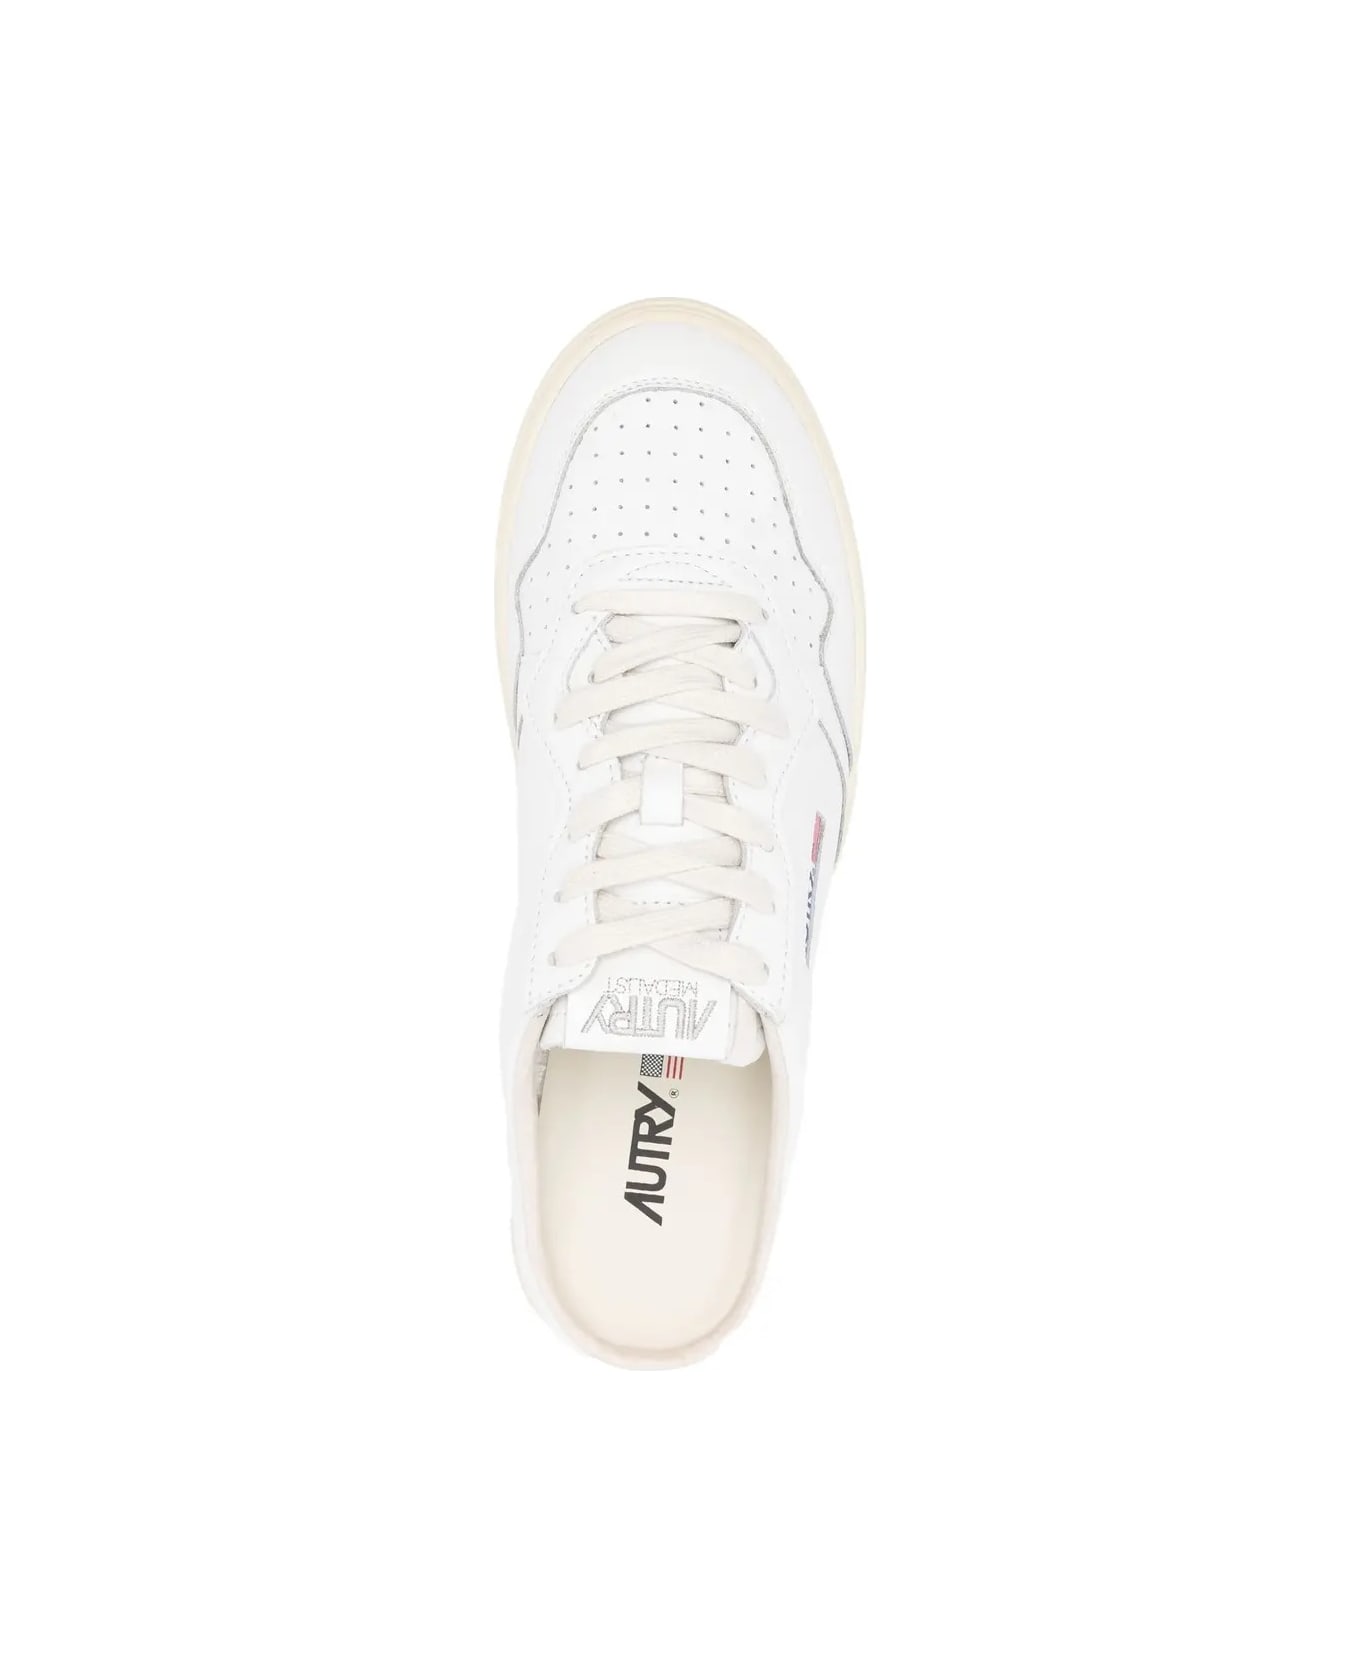 Autry White Medalist Mule Sneakers - White